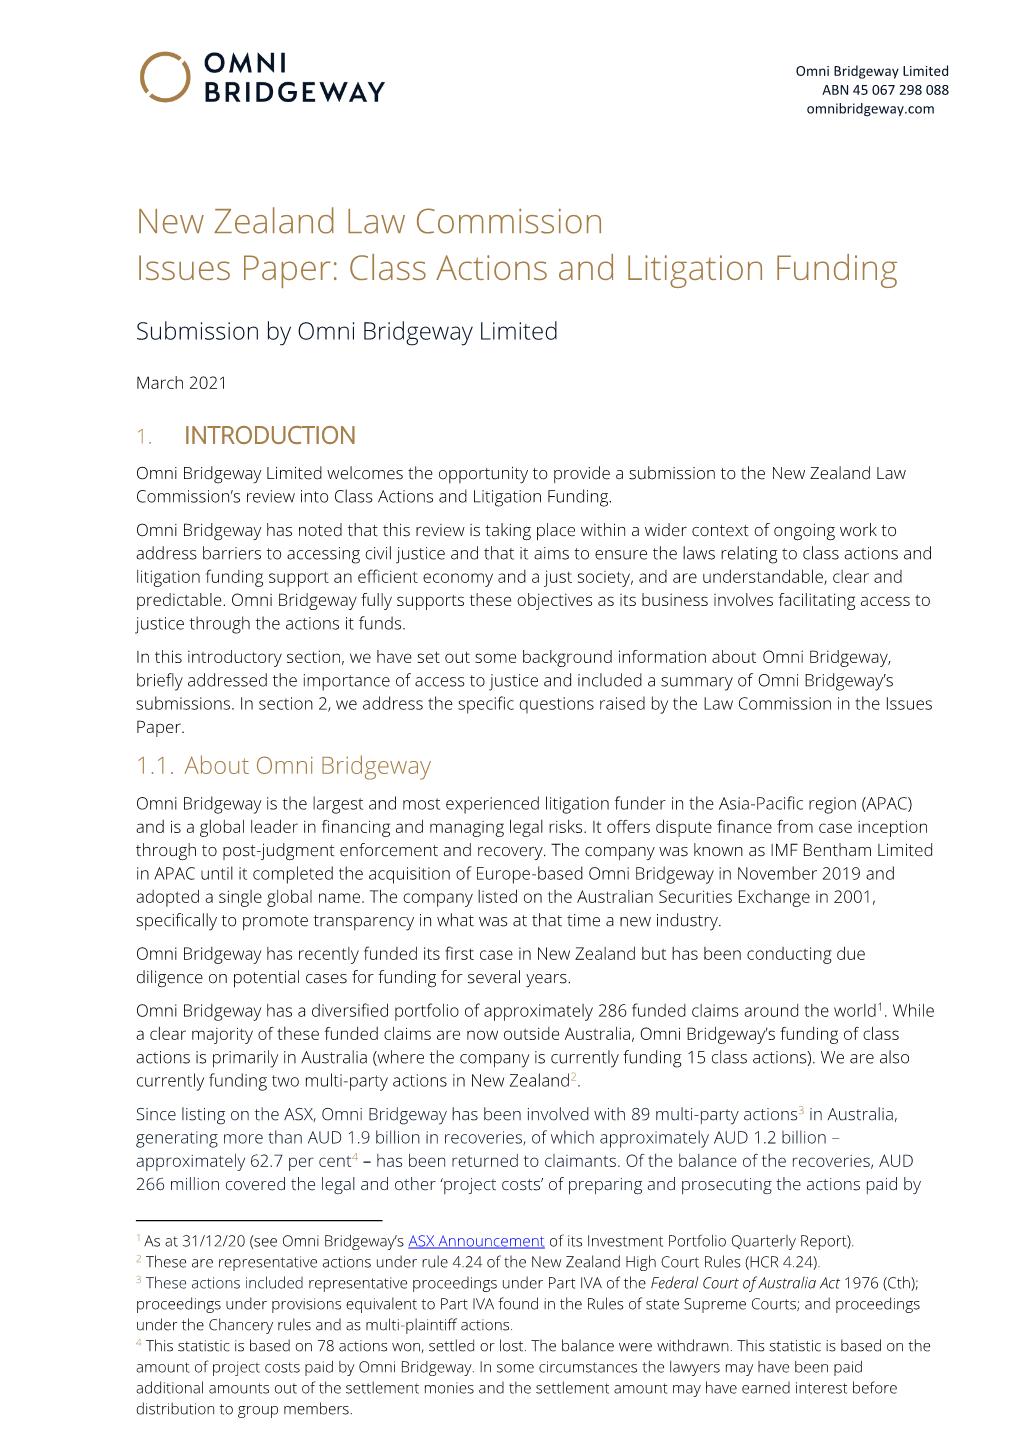 New Zealand Law Commission Issues Paper: Class Actions and Litigation Funding